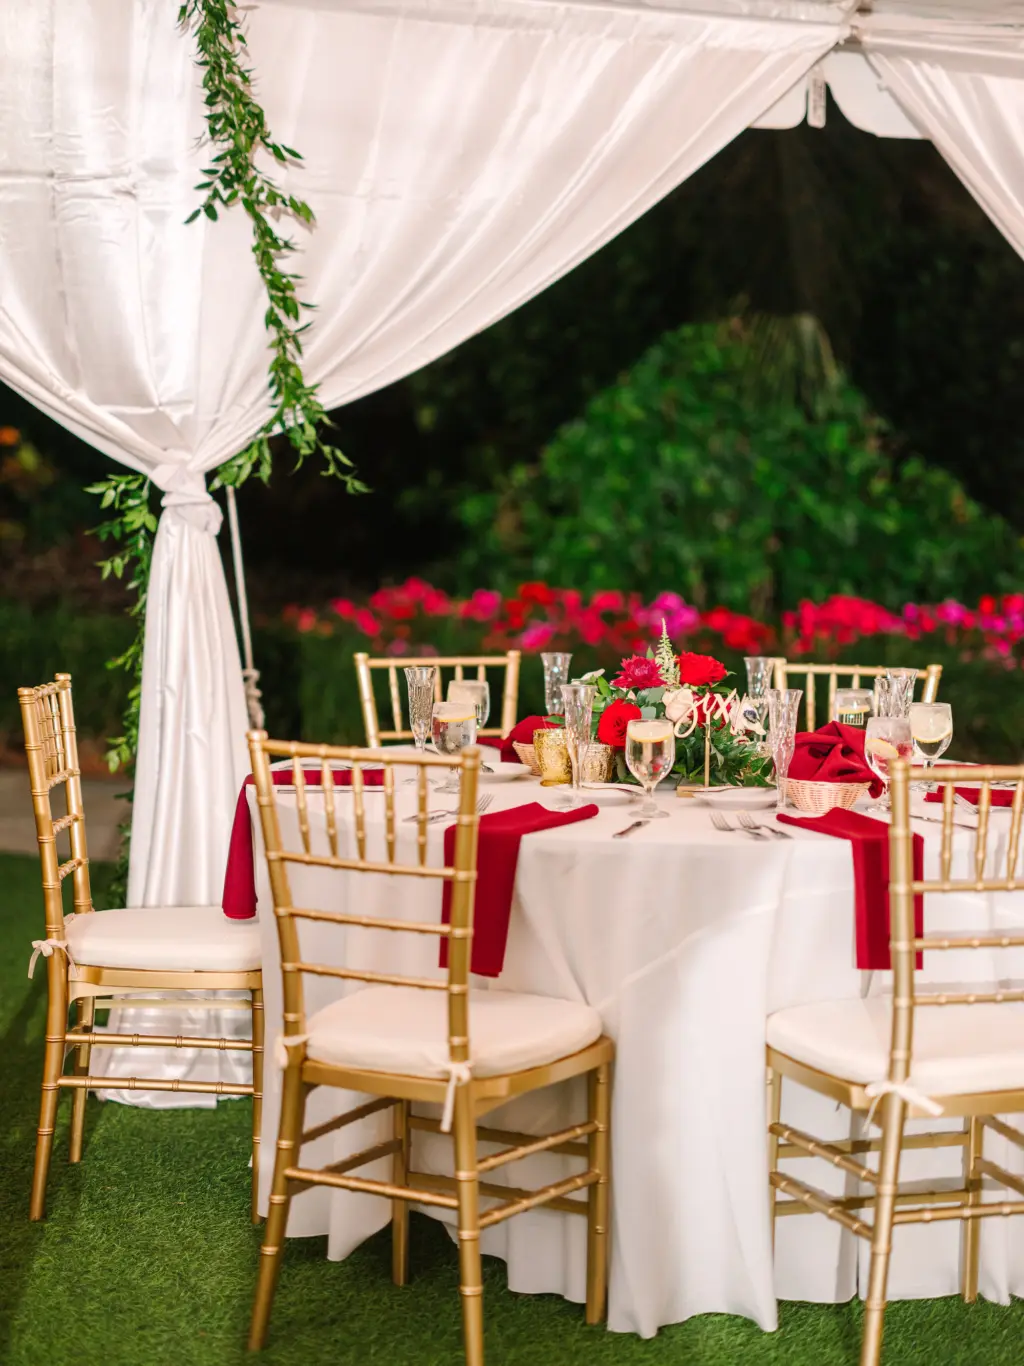 White and Red Christmas Inspired Wedding Reception Decor Ideas | Laser Cut Table Numbers | Red Rose, White Anemone, and Greenery Centerpiece Inspiration | Gold Chiavari Chairs | Tampa Bay Caterer Amici's Catering